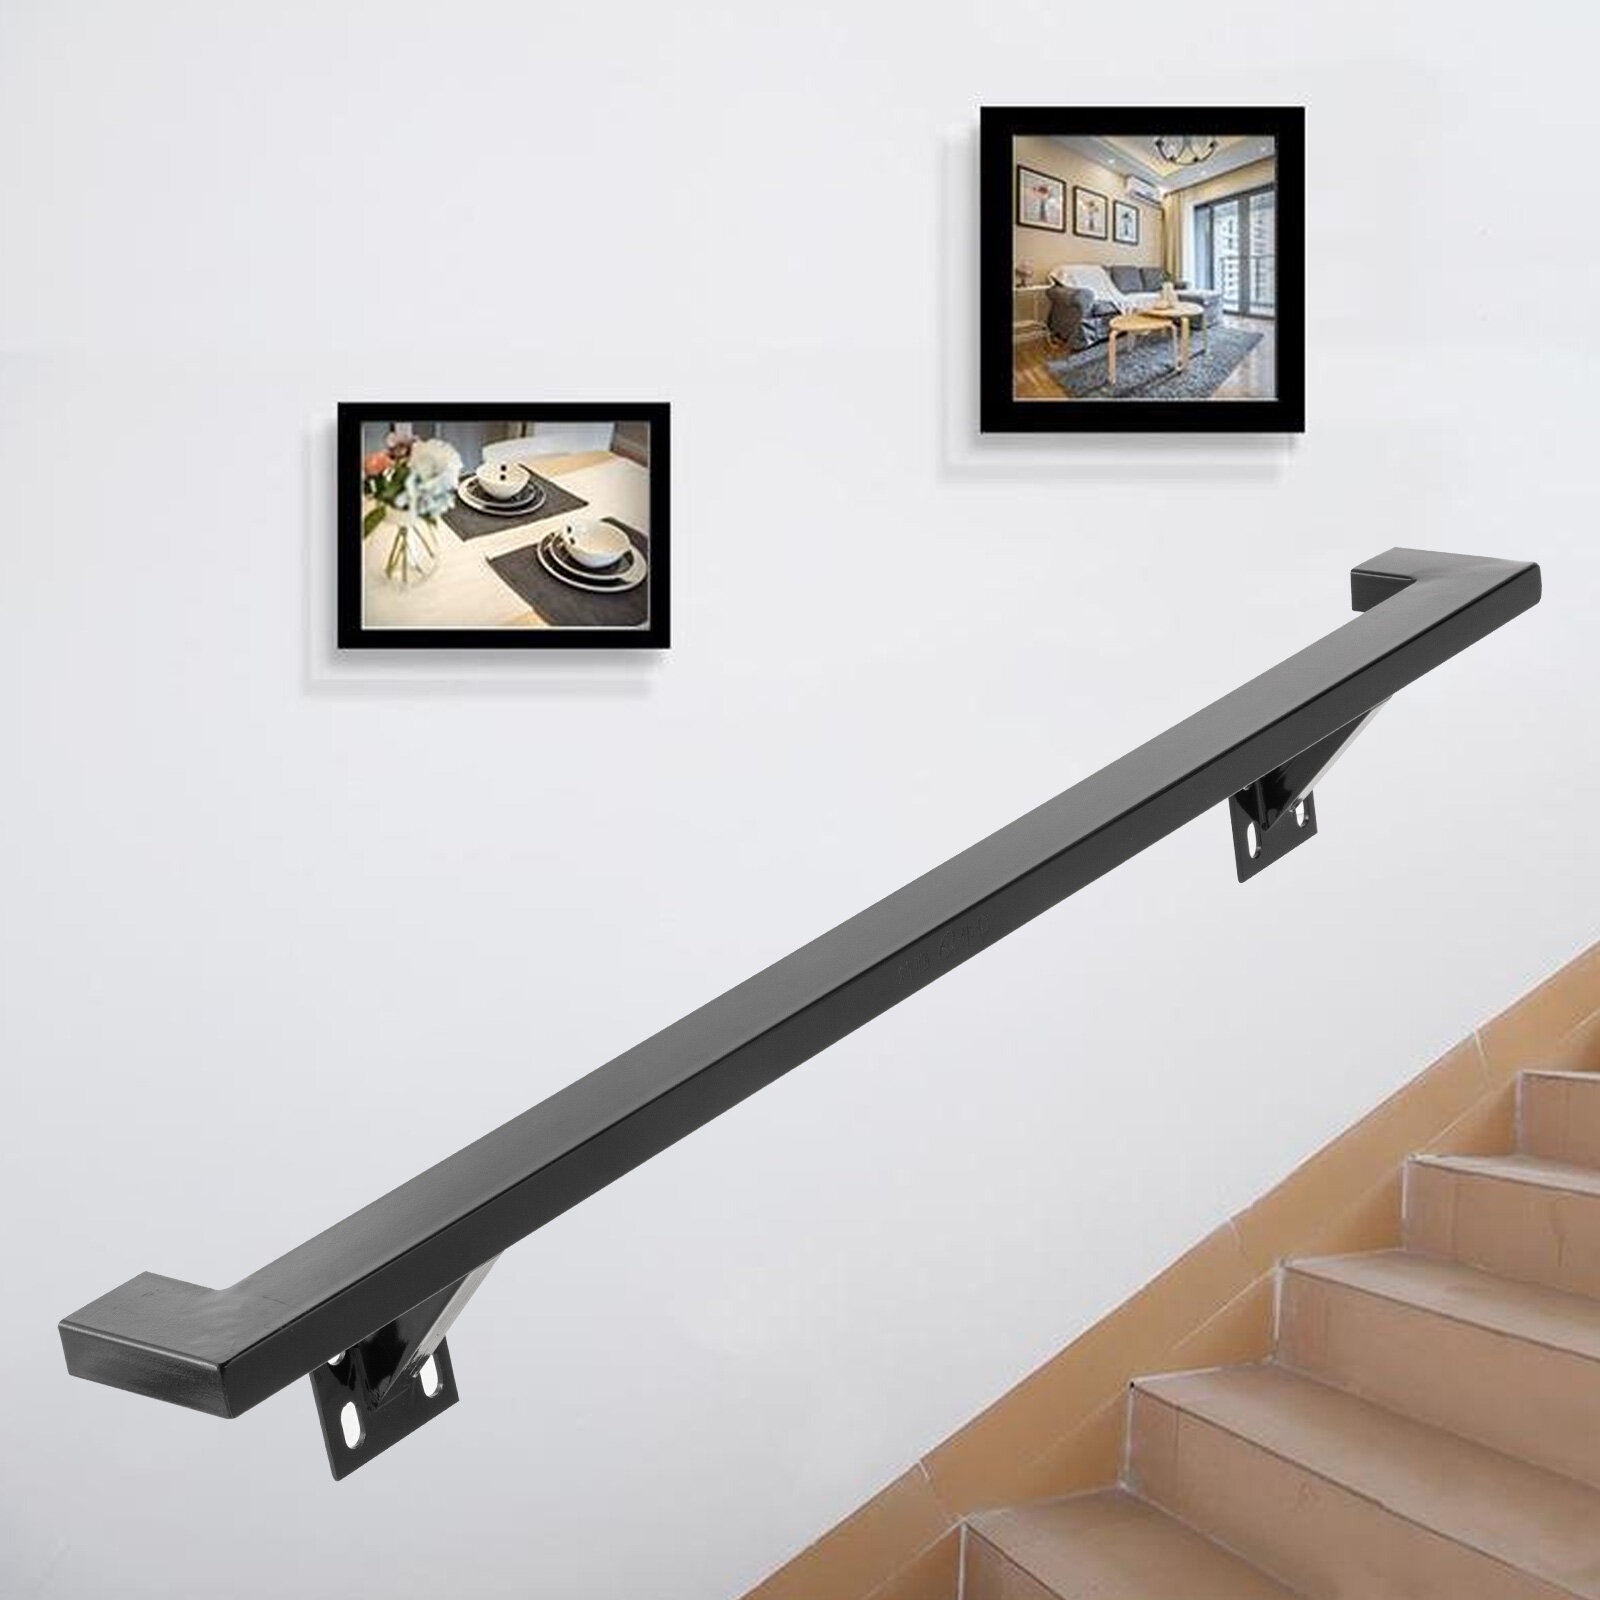 Happybuy Stair Handrail Five Step Stair Rail 5ft Length Modern Handrails for Stairs Black Wrought Iron Indoor Handrail for Stairs 200lbs Capacity Wall Mounted Stairway Railing with Brackets